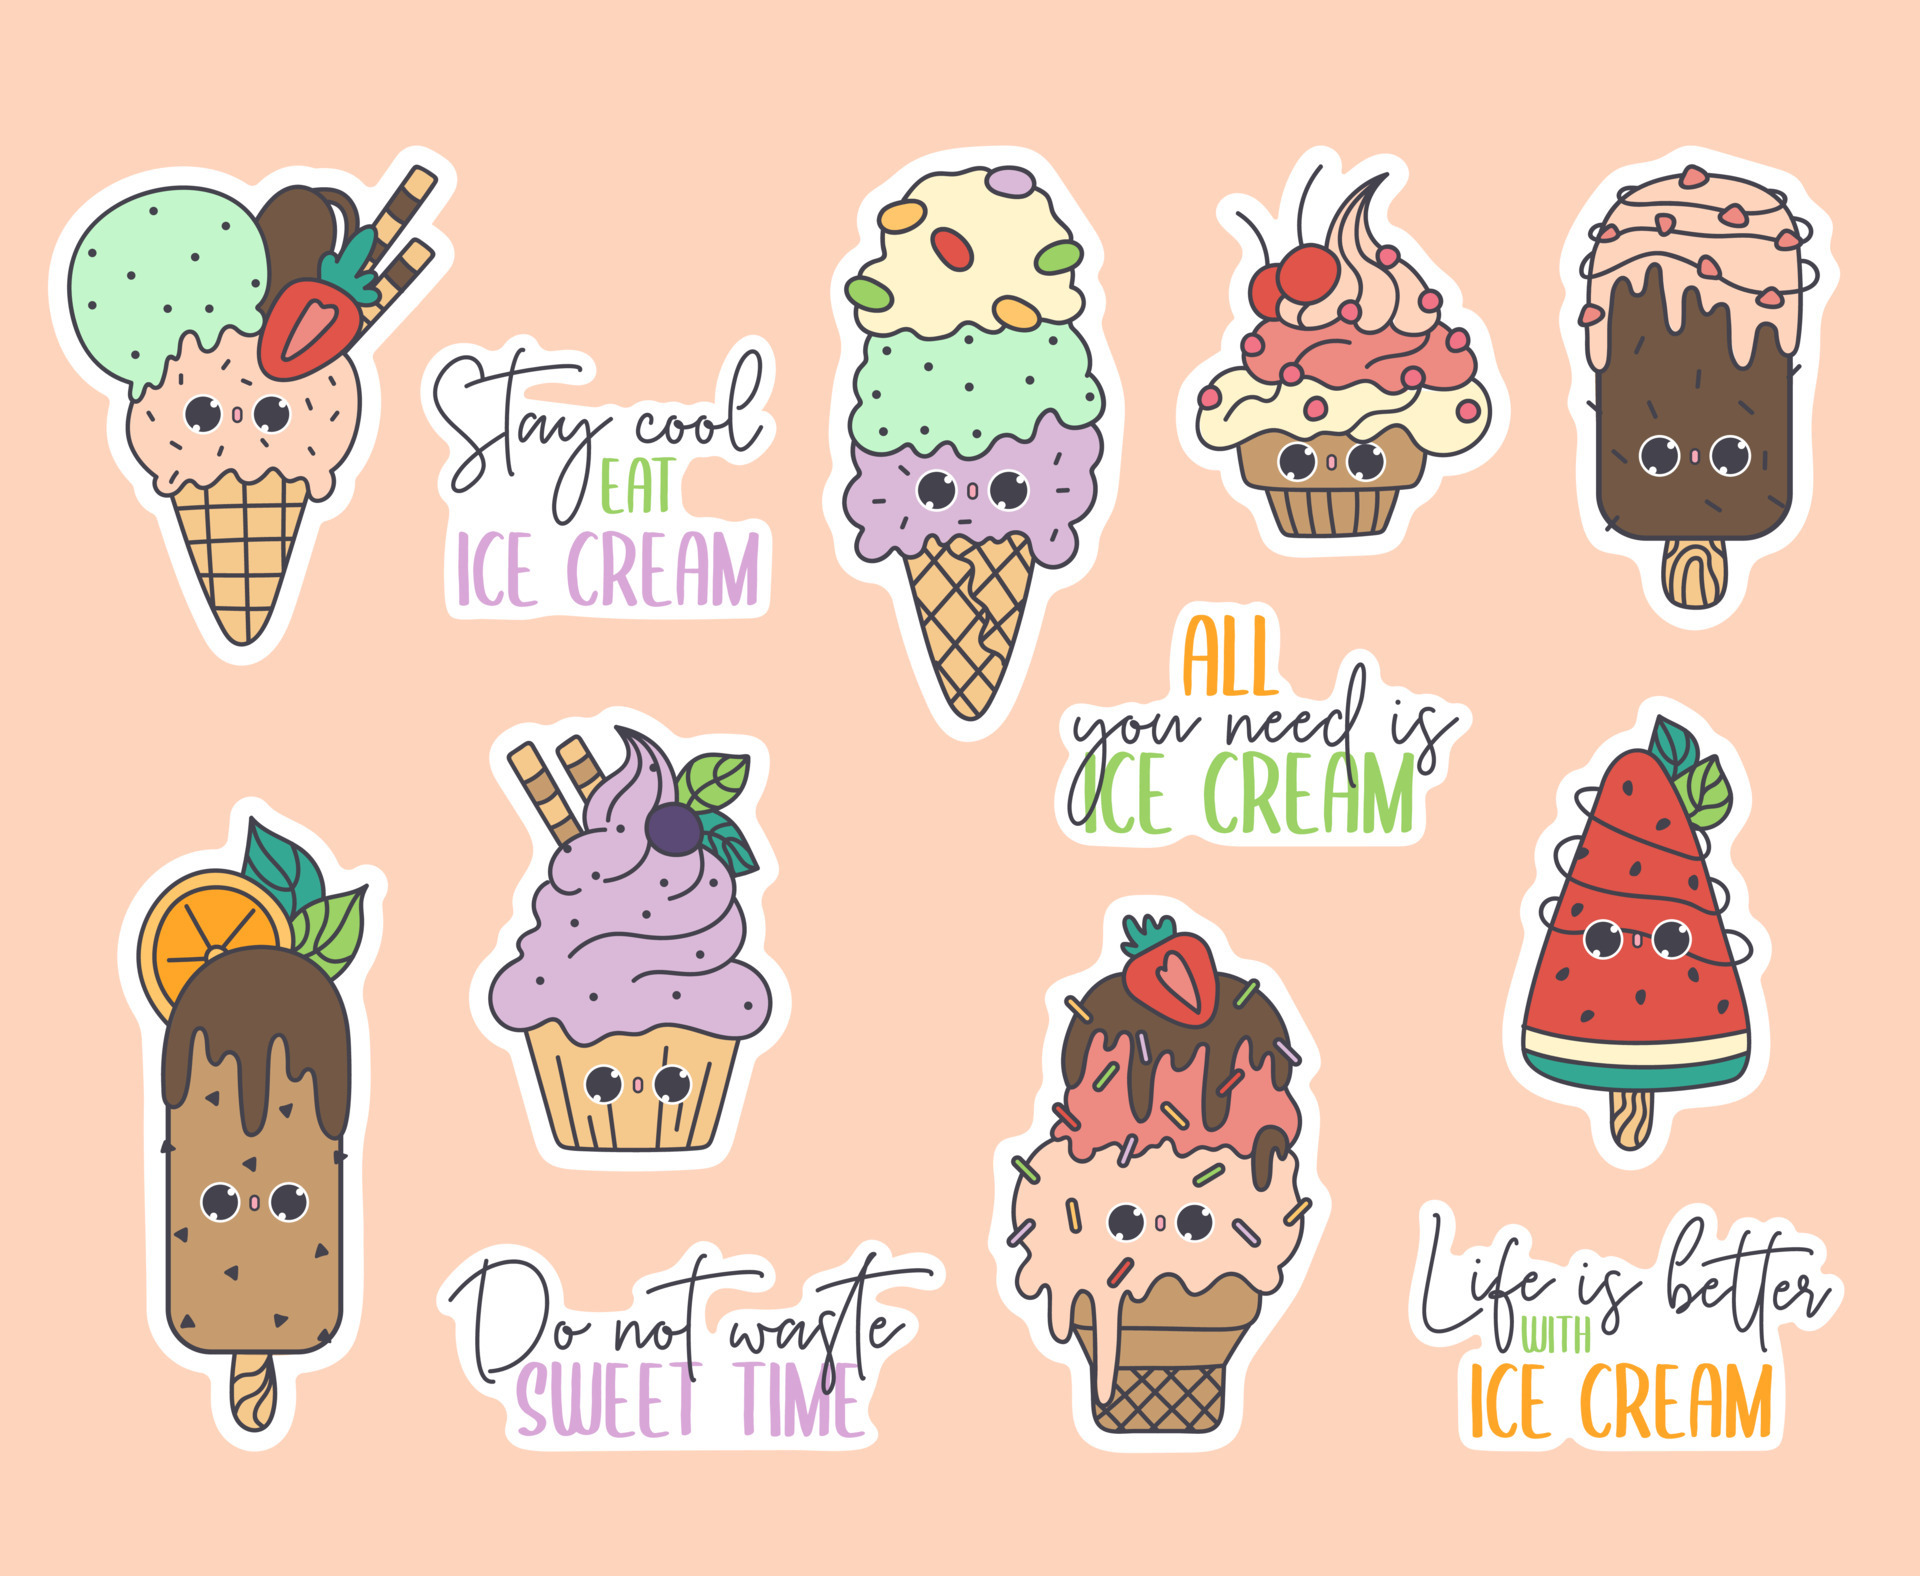 Cute food Sticker pack Printable stickers for kids Sweets